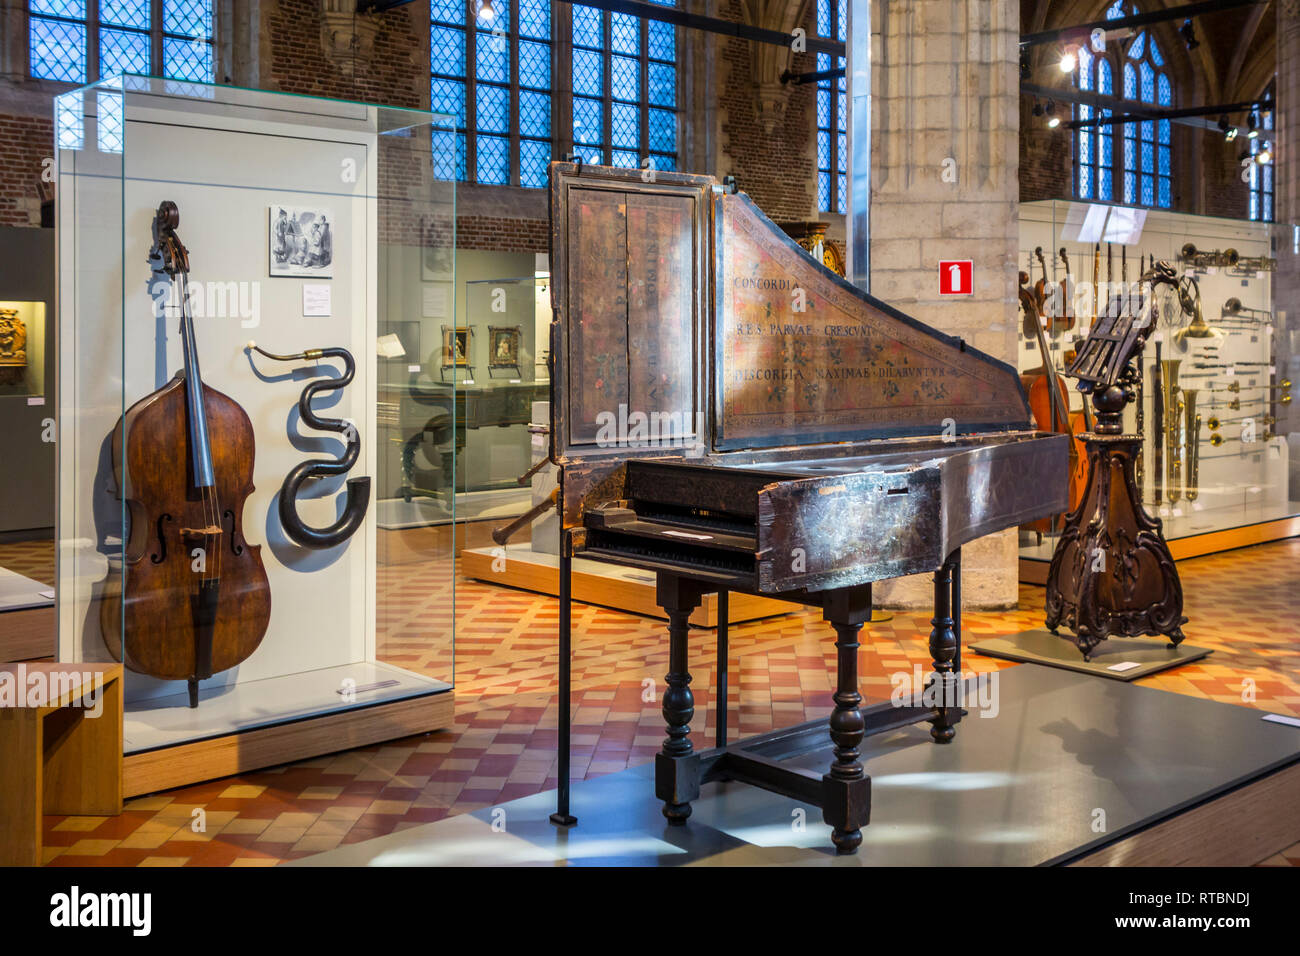 17th century harpsichord by Andreas Ruckers in the Vleeshuis / Butcher's Hall / Meat House, museum about musical instruments in Antwerp, Belgium Stock Photo